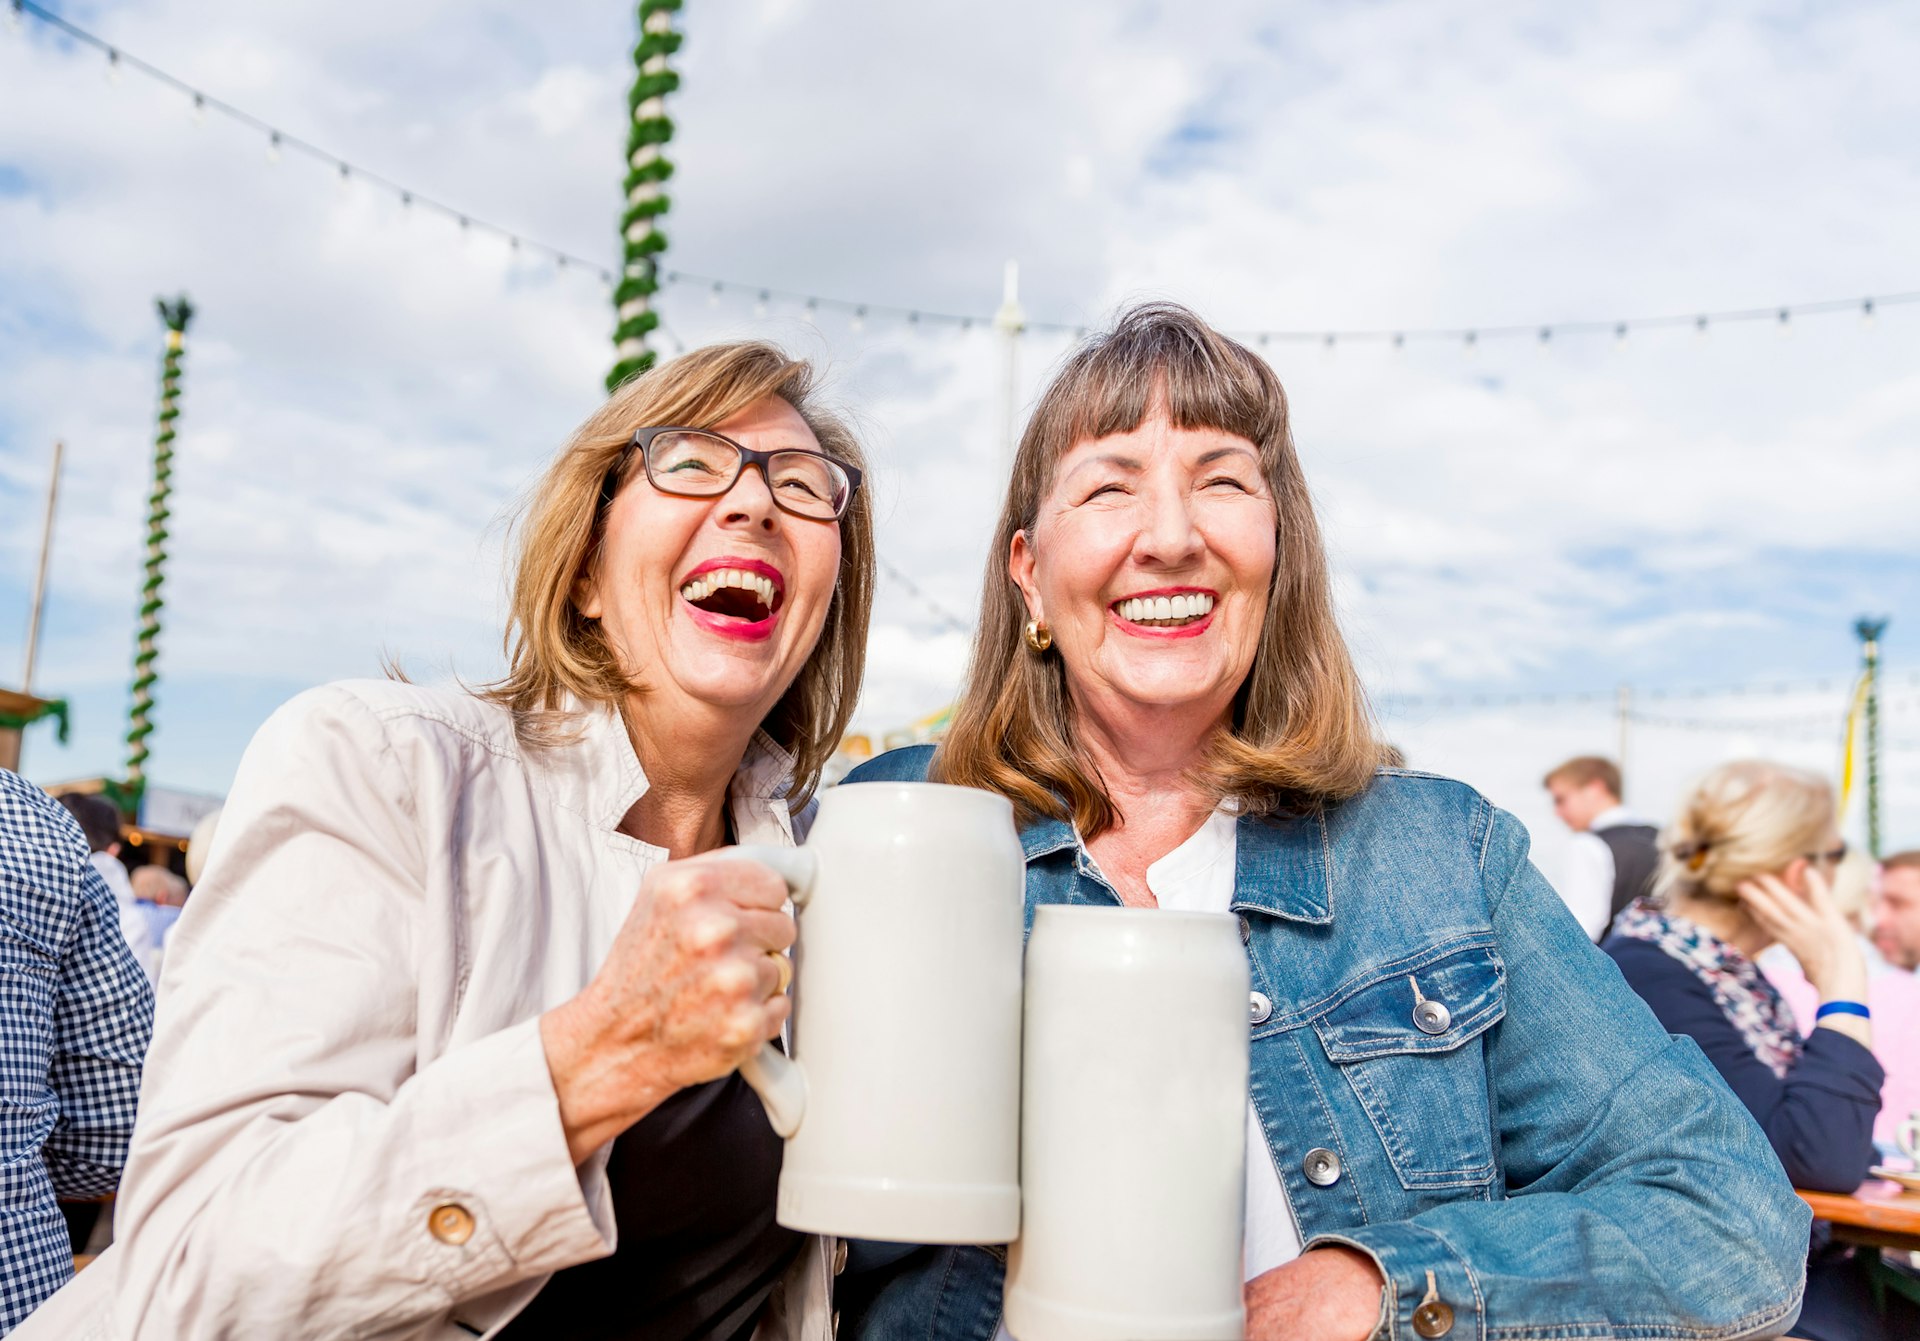 Two senior women smile as they clink their glasses together at a beer festival